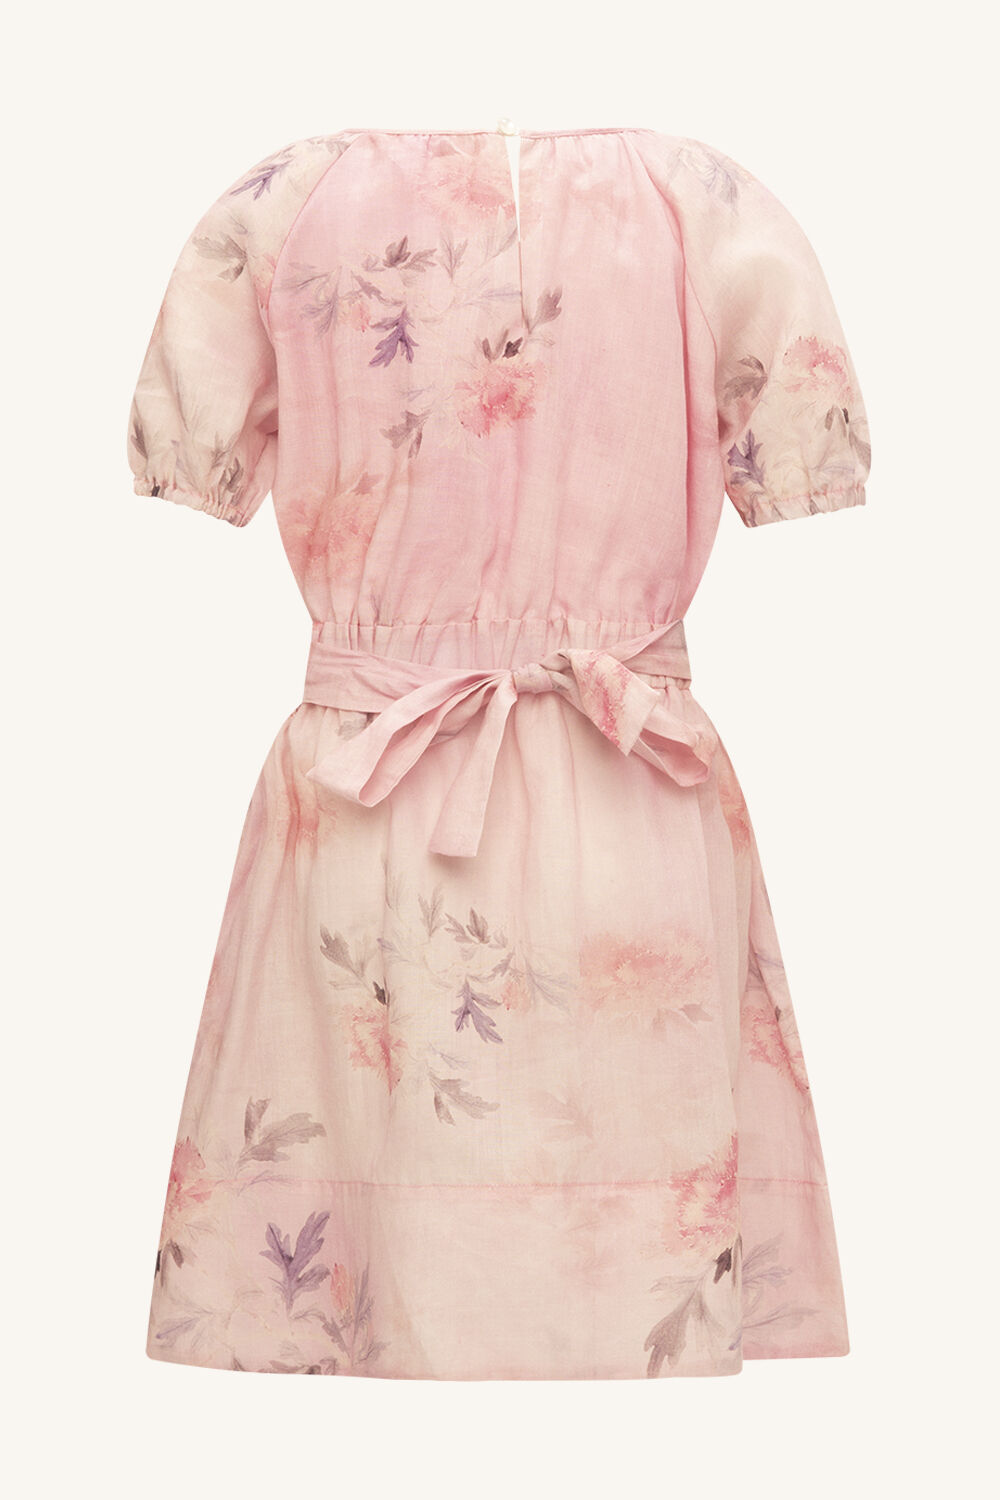 GIRLS LOLA FLORAL TIE BACK DRESS in colour PEACH WHIP